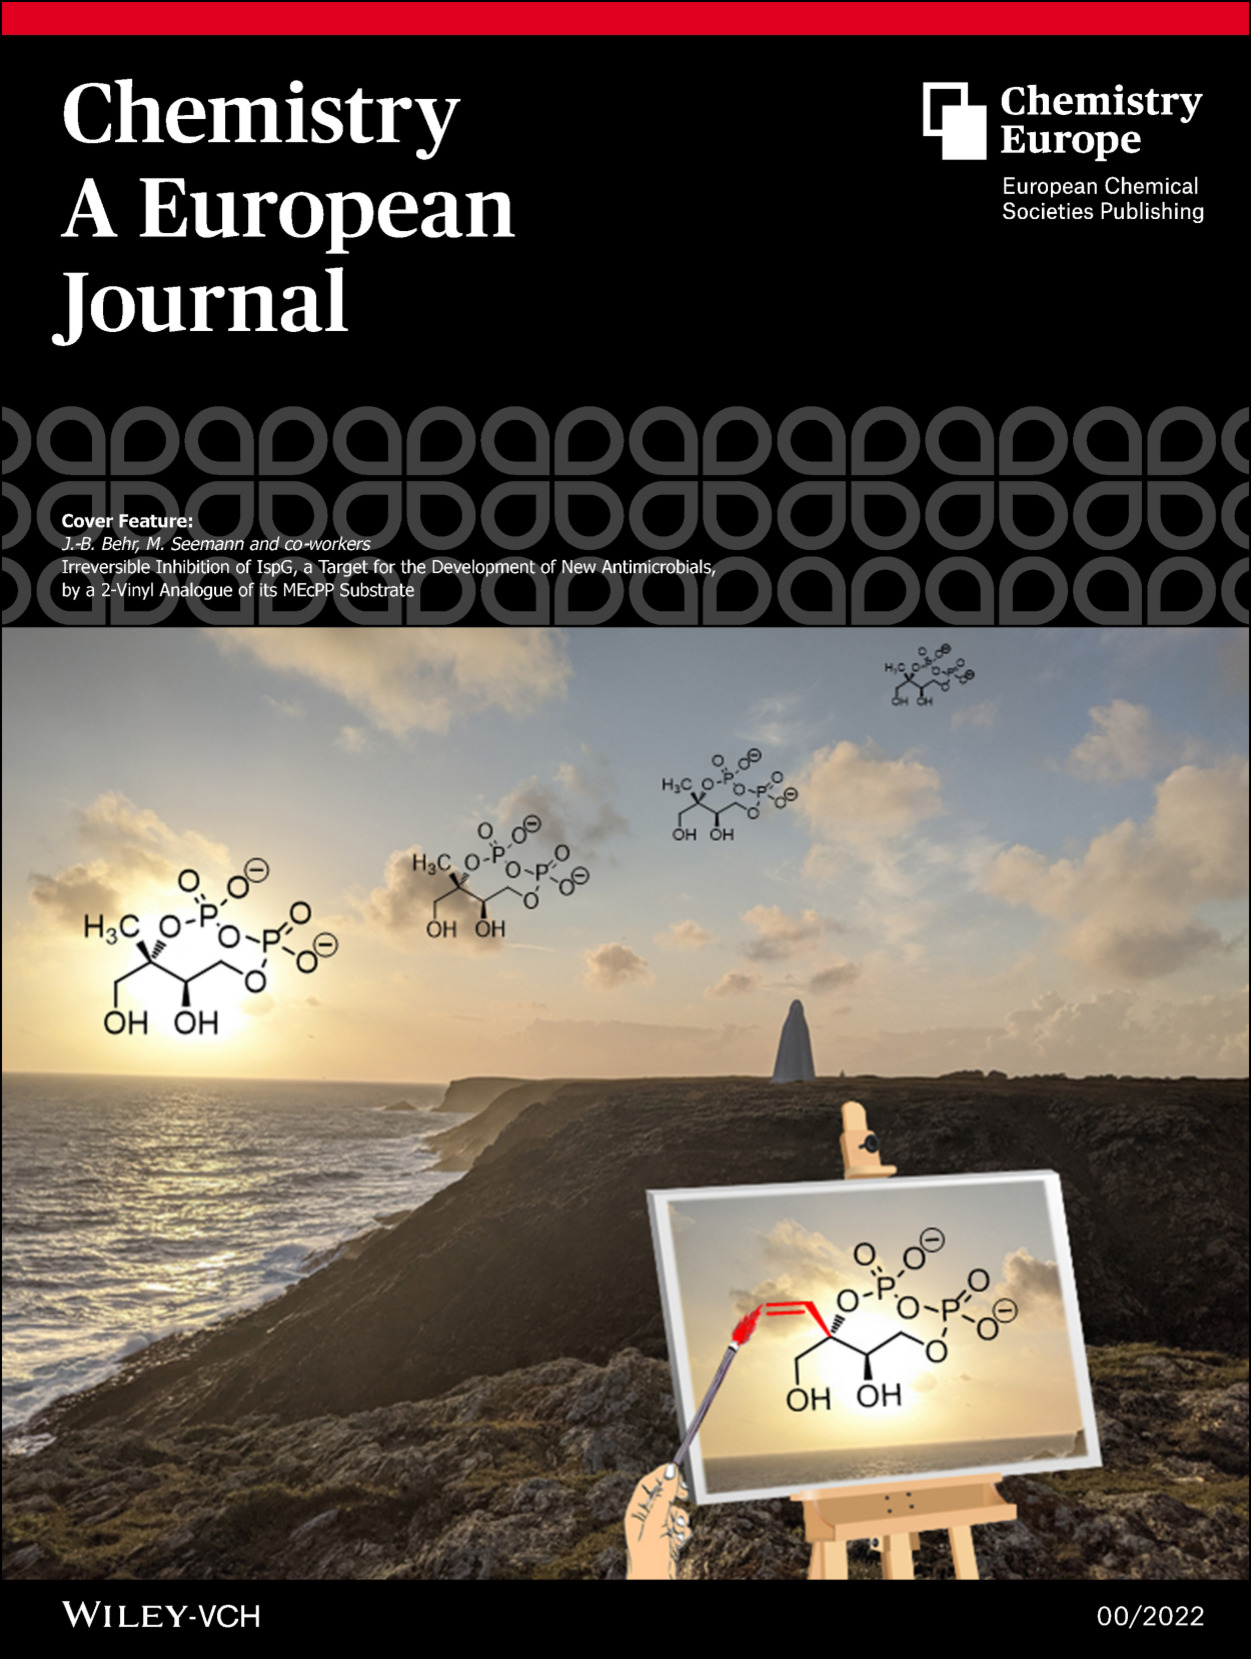 Cover of the scientific journal Chemistry